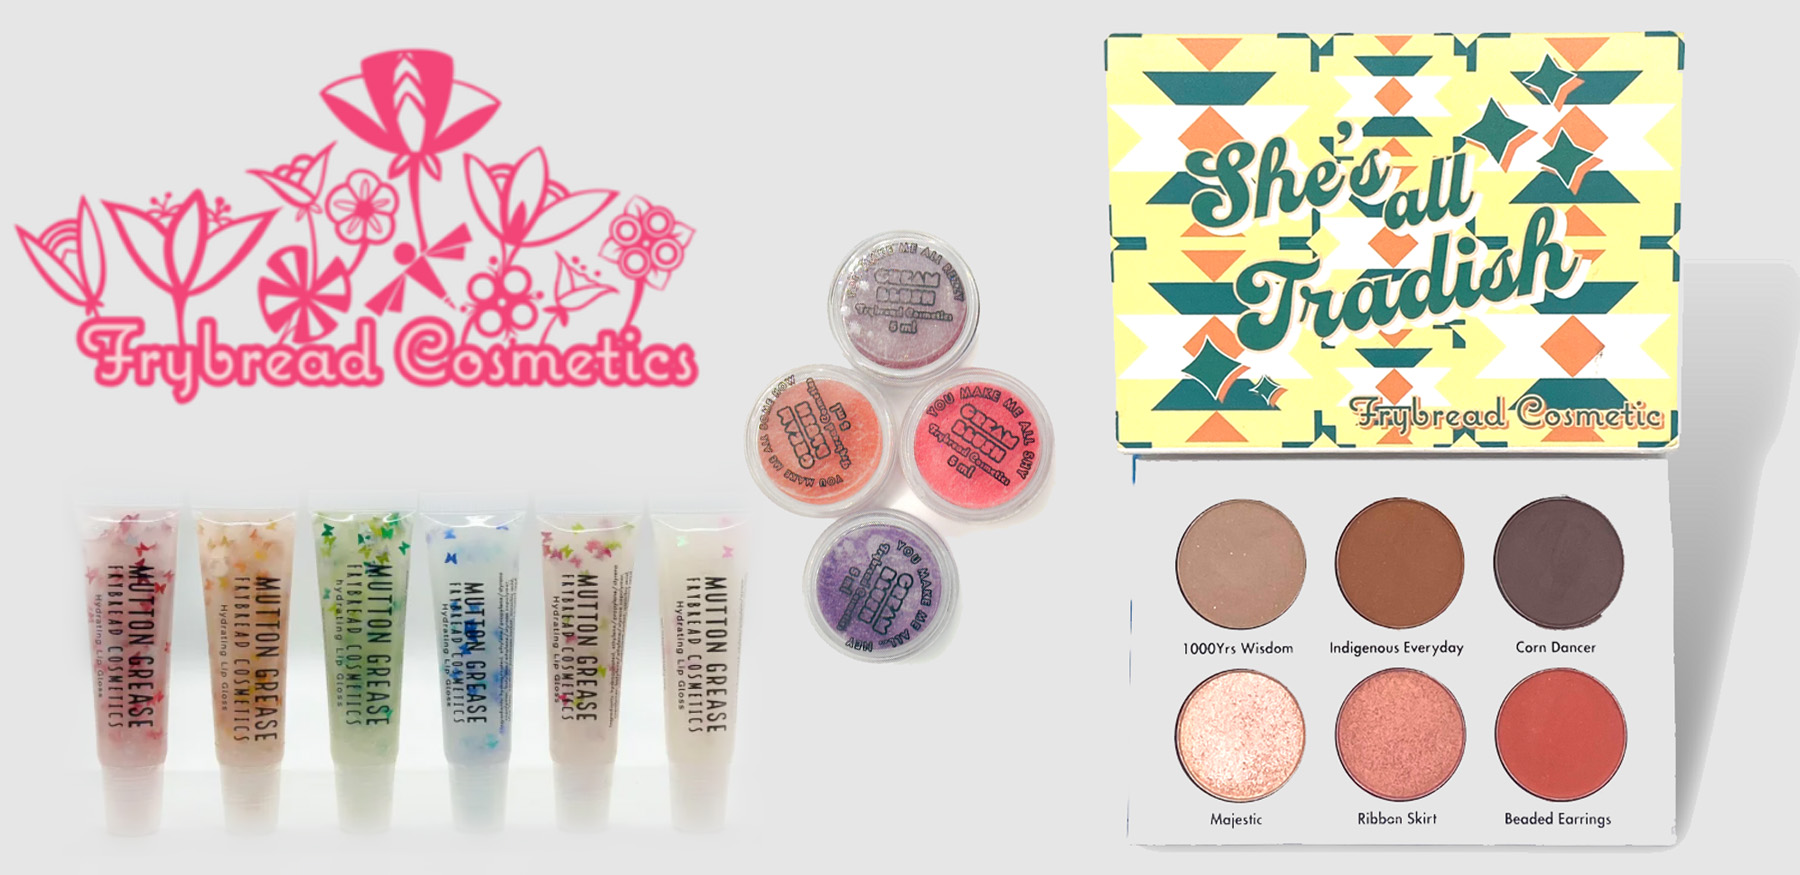 Photo of a range of FryBread Cosmetics including lip gloss, blush, and eye shadow. 